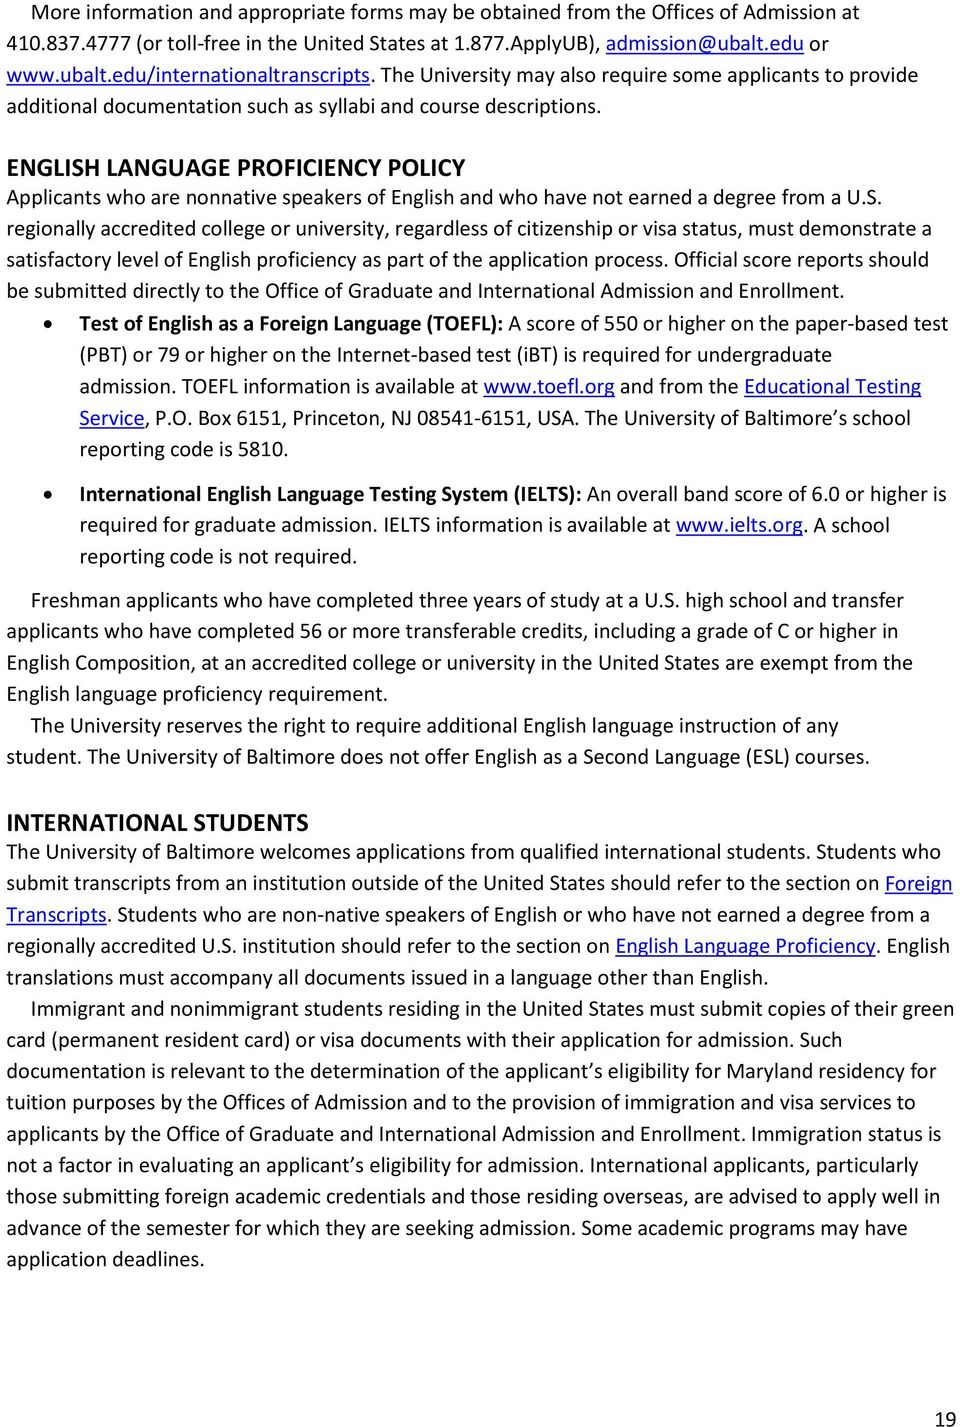 ENGLISH LANGUAGE PROFICIENCY POLICY Applicants who are nonnative speakers of English and who have not earned a degree from a U.S. regionally accredited college or university, regardless of citizenship or visa status, must demonstrate a satisfactory level of English proficiency as part of the application process.